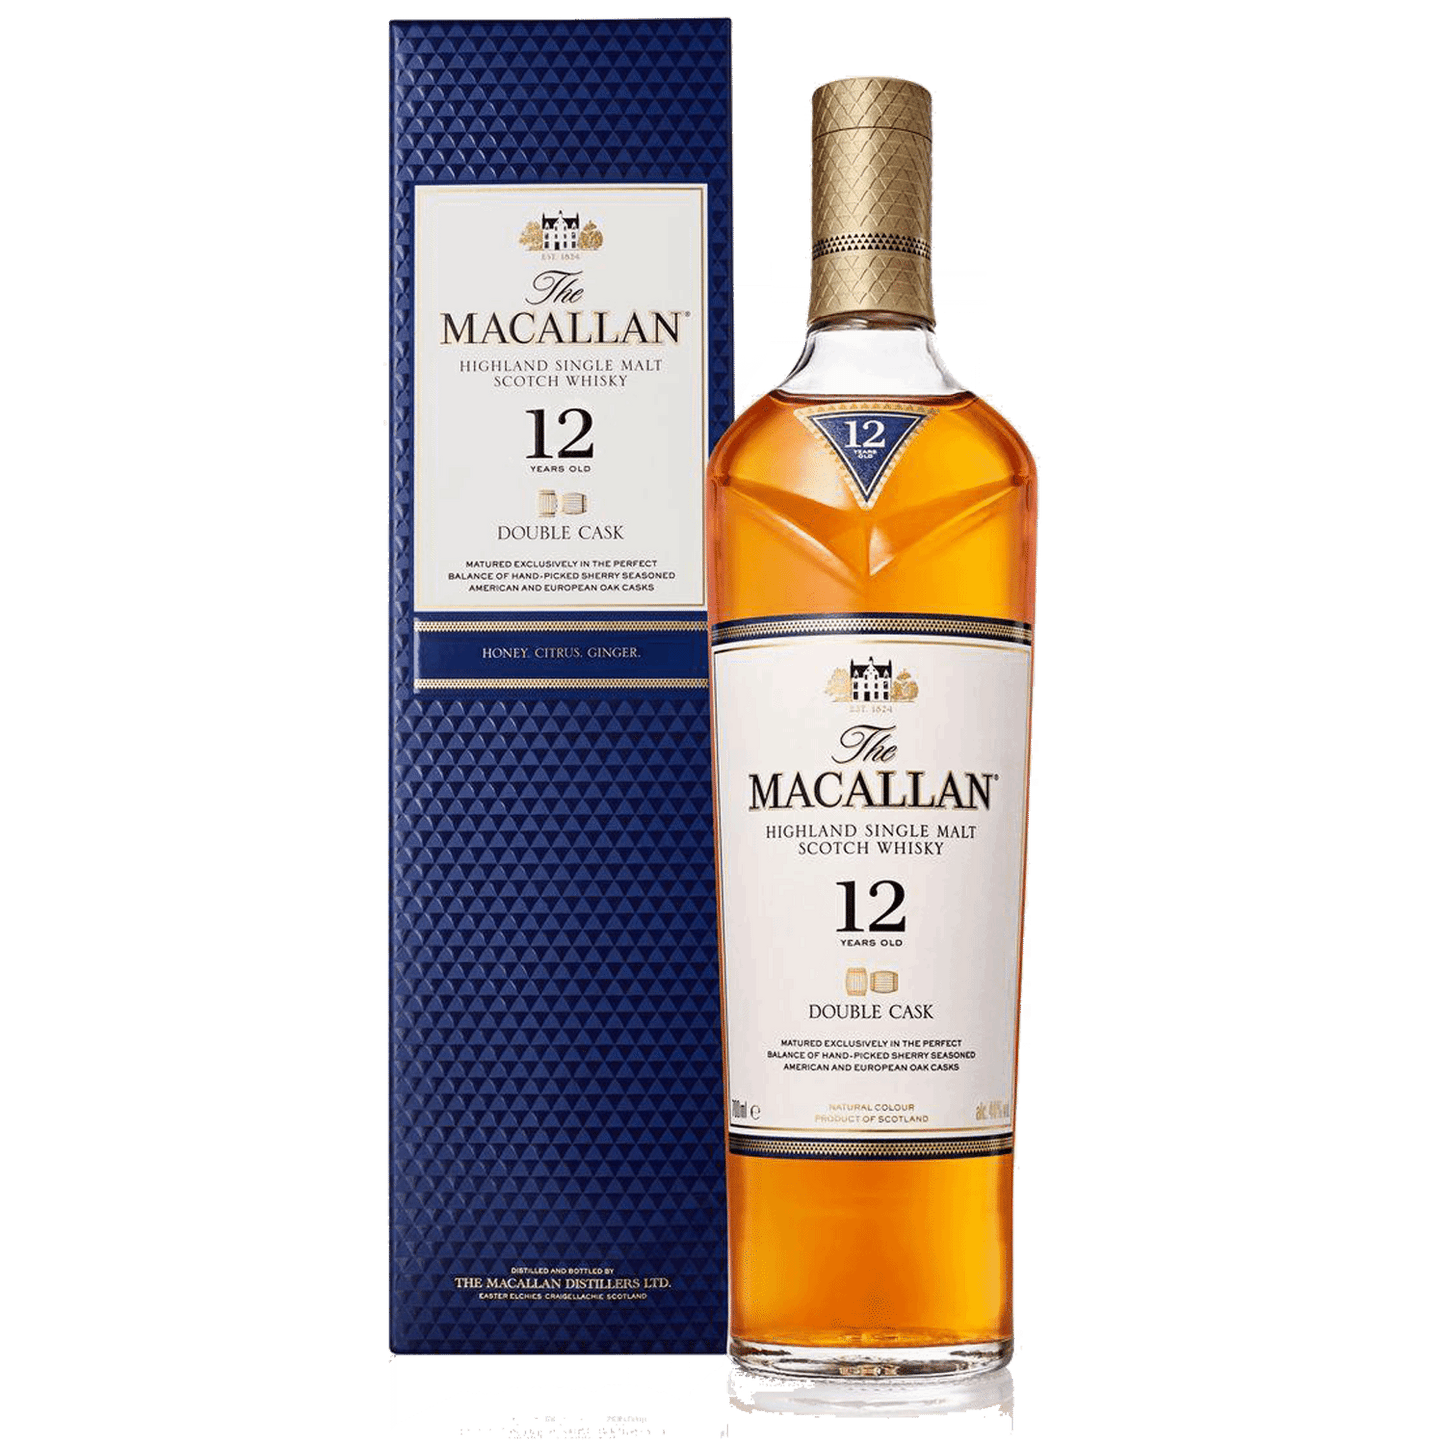 MACALLAN 12 YEAR OLD DOUBLE CASK